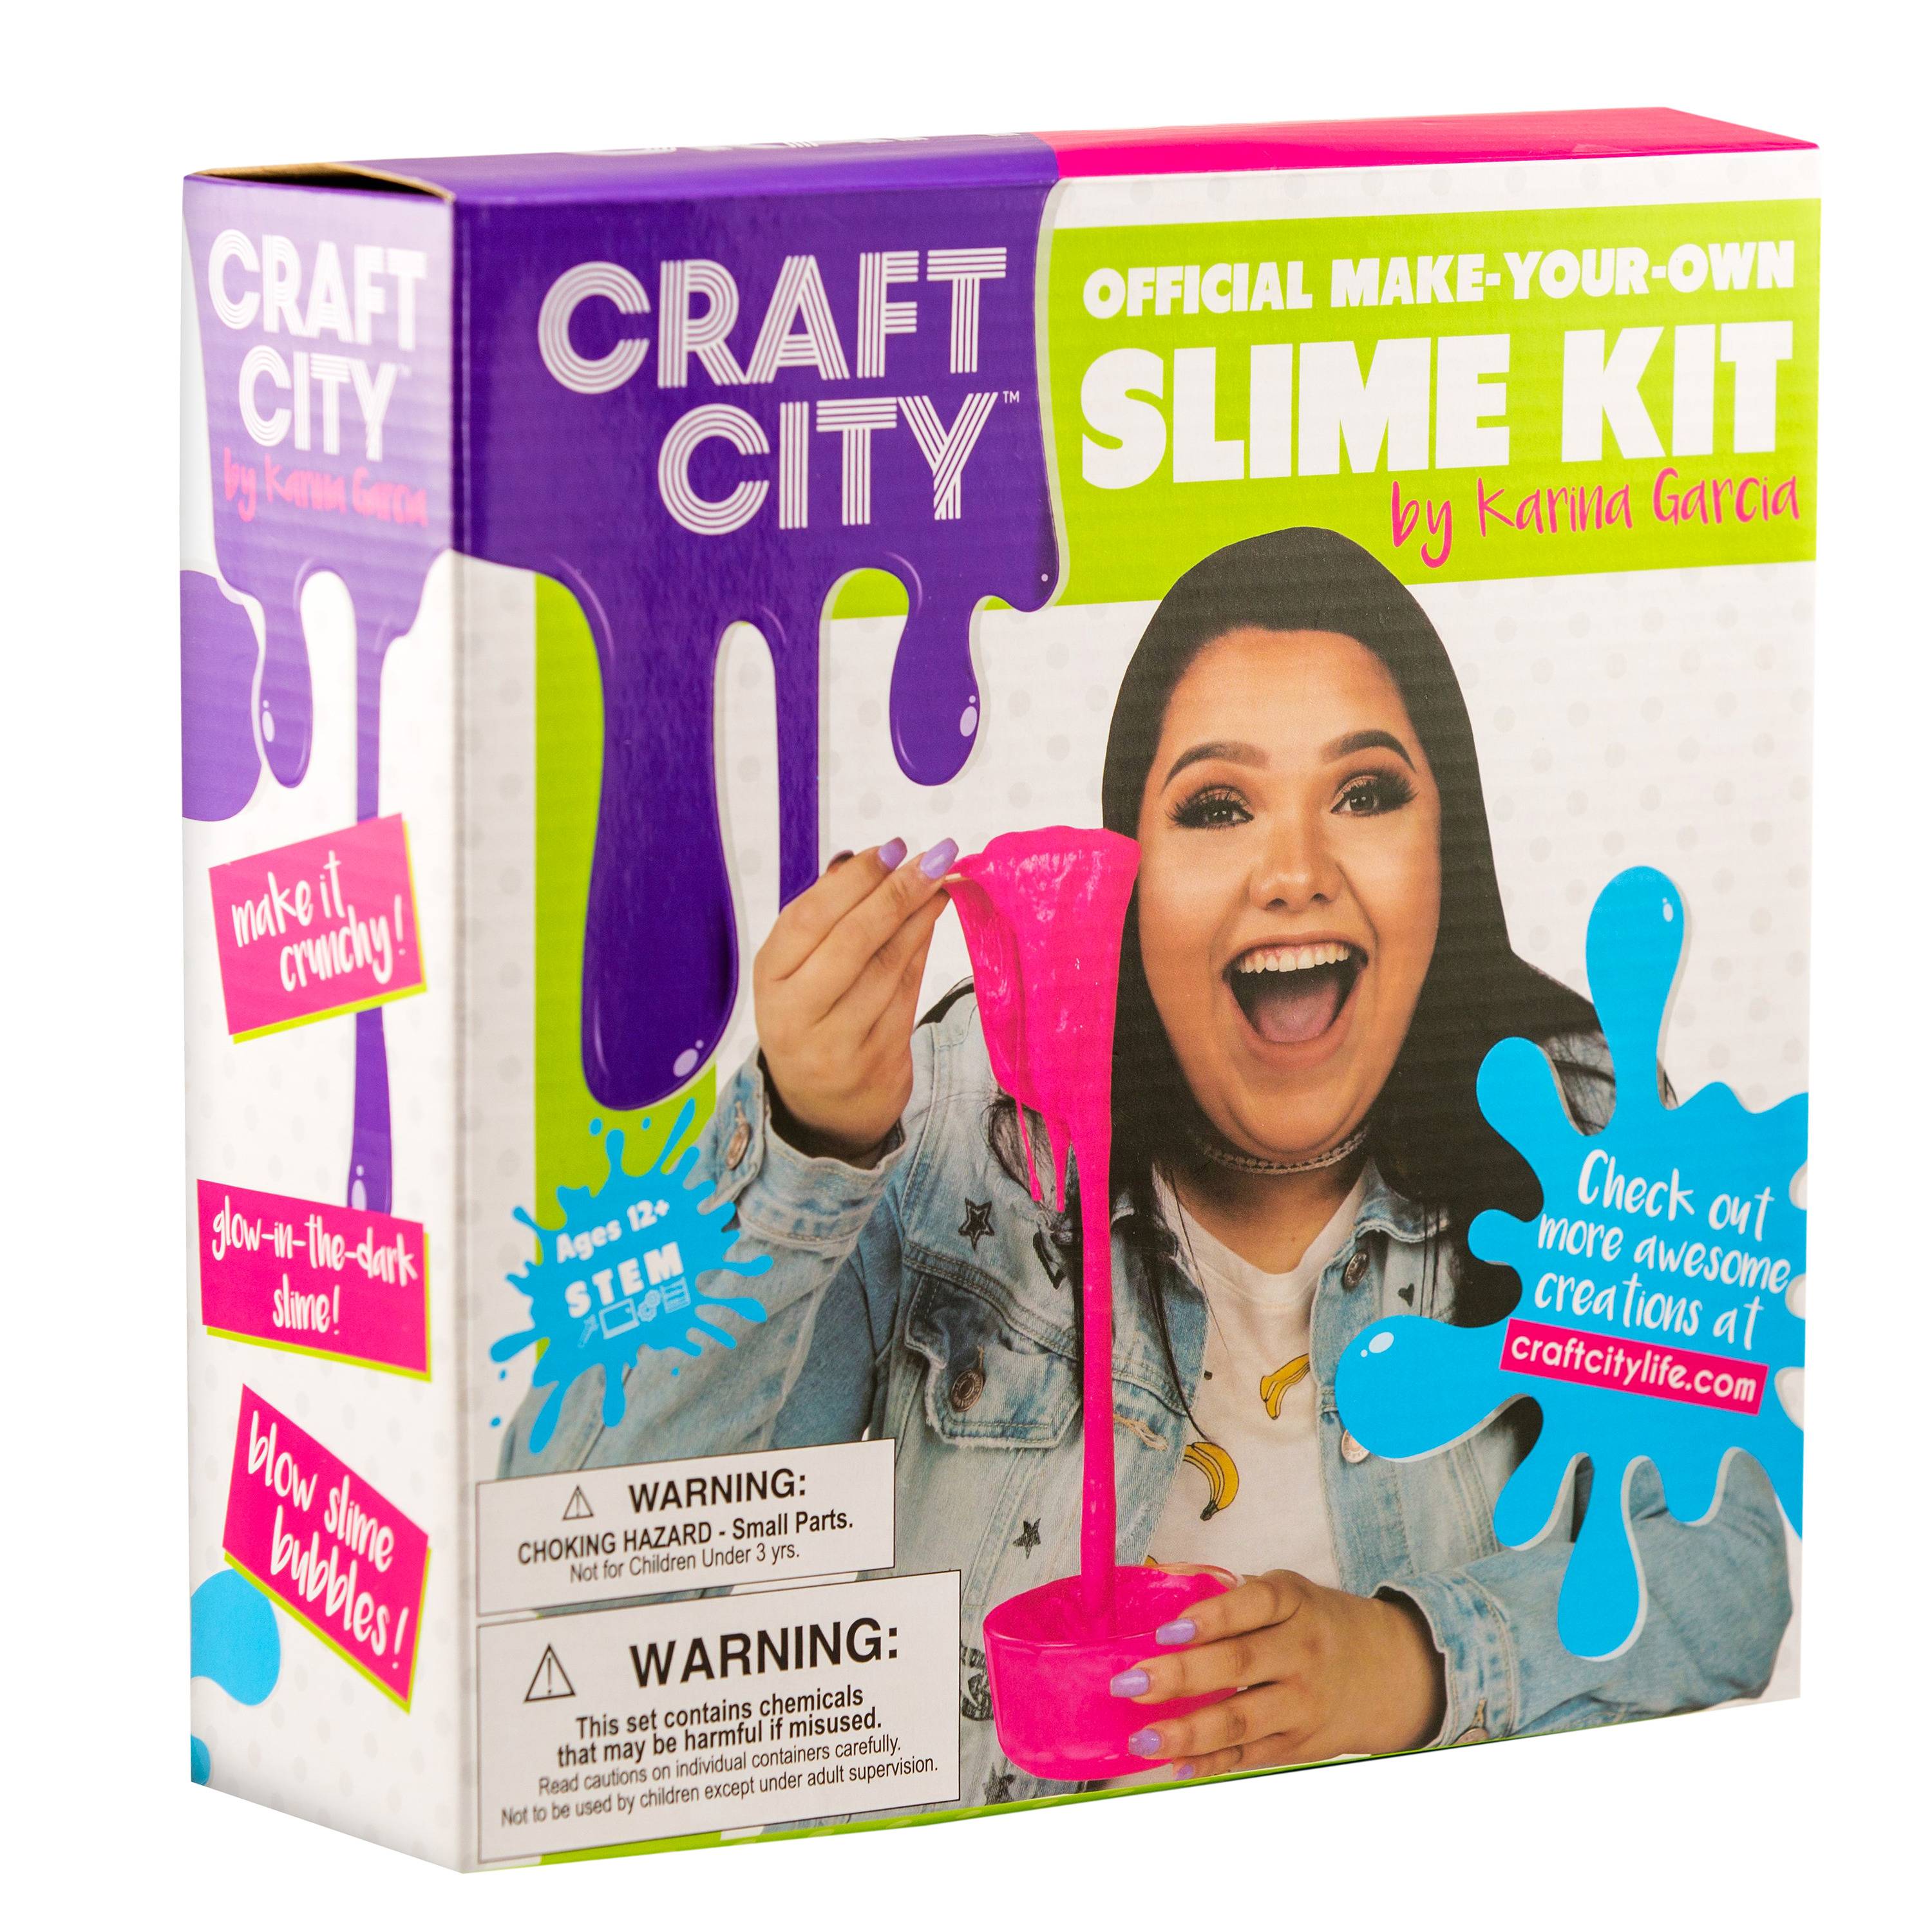 Karina garcias craft city slime kit review giveaway â the naptime reviewer